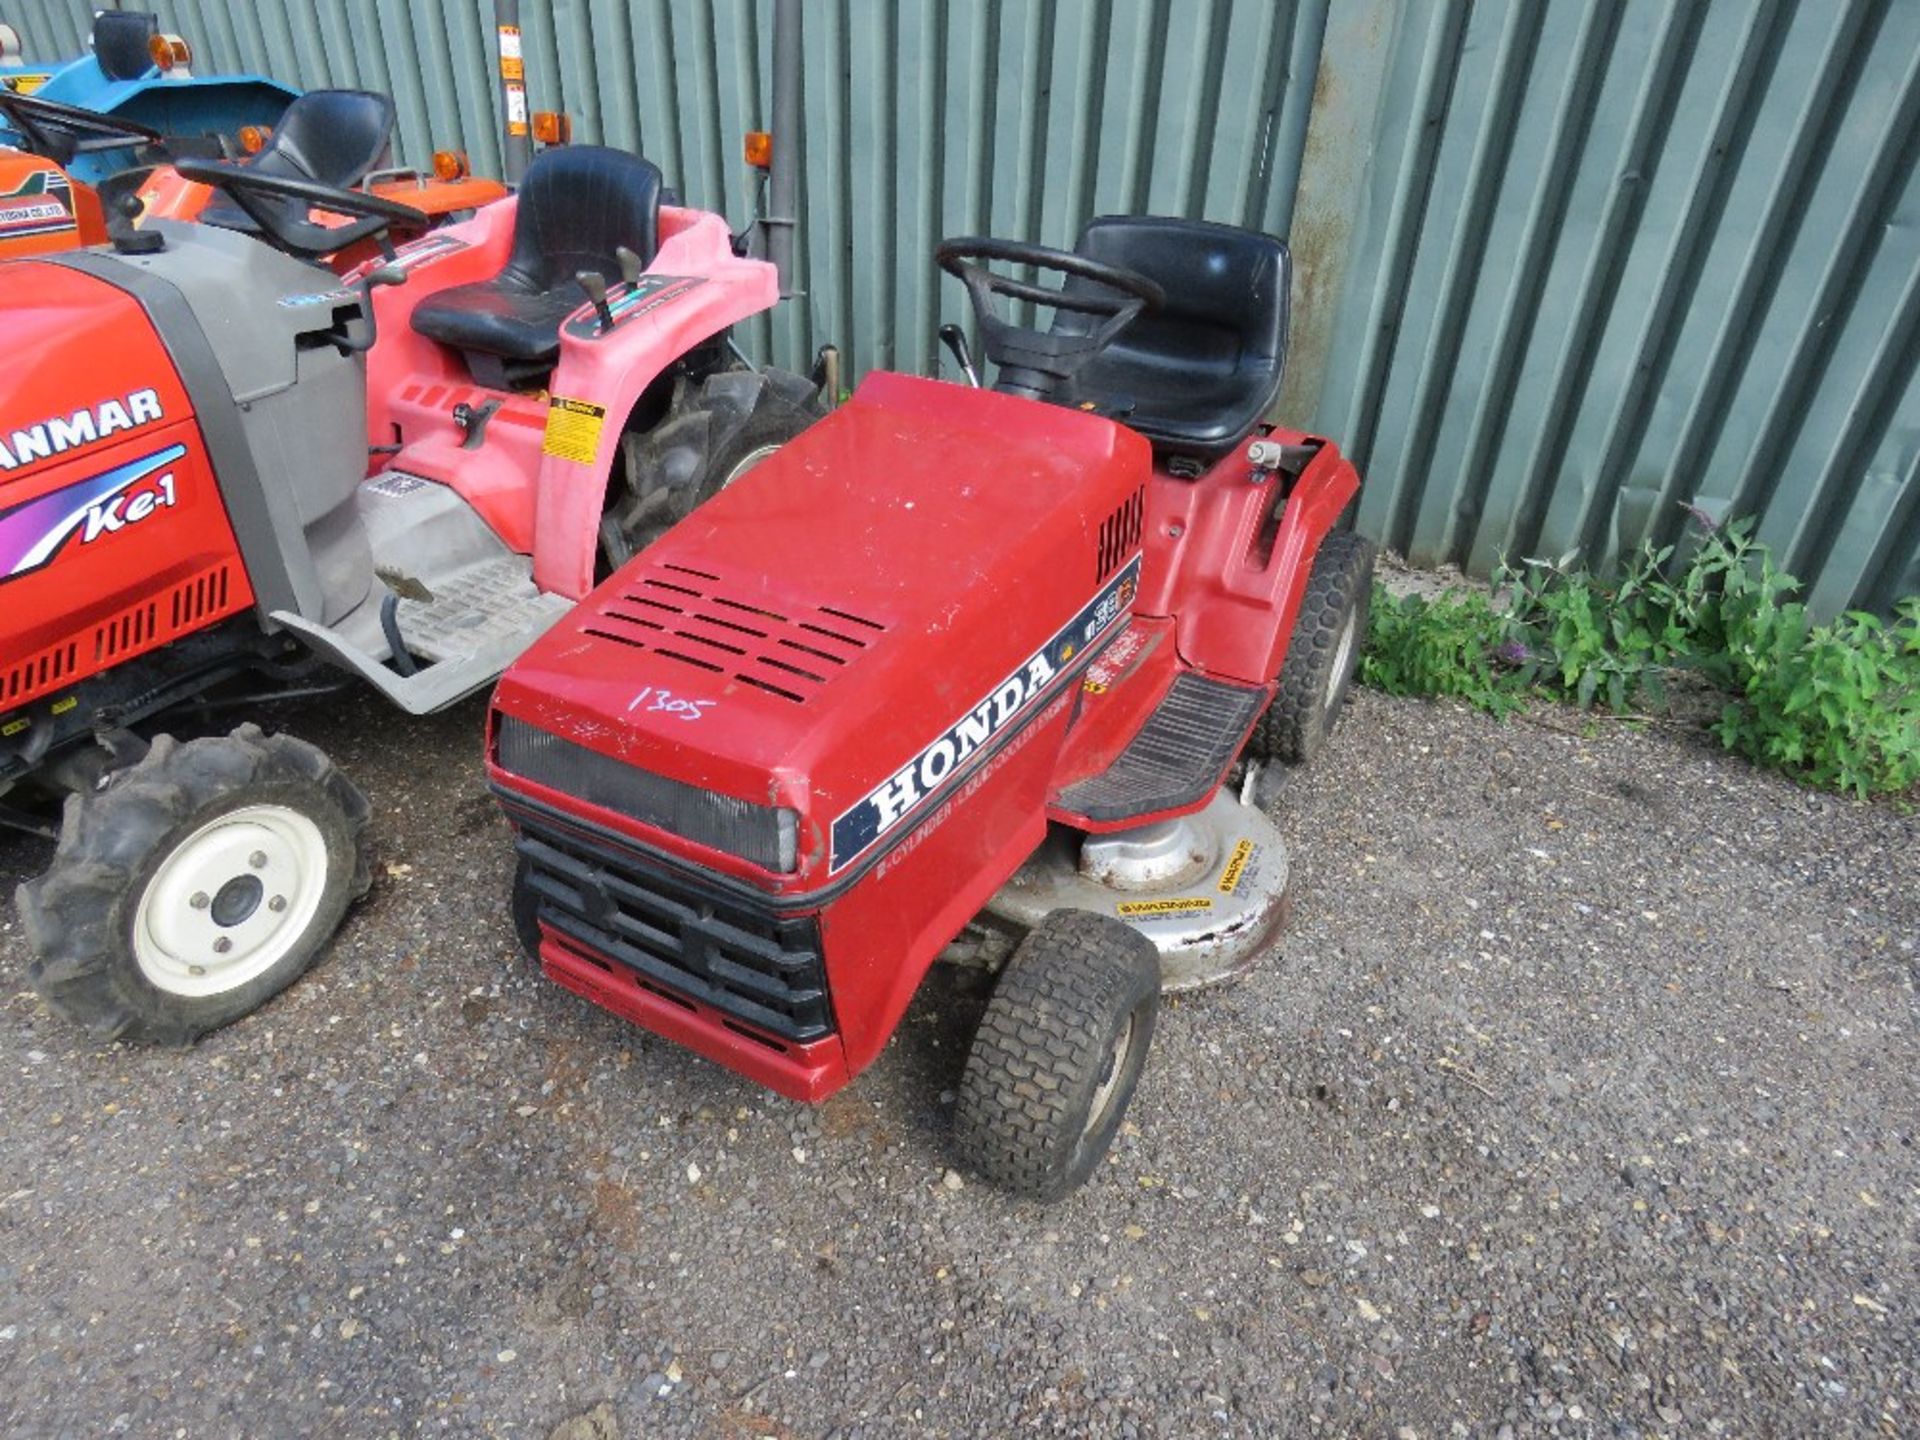 HONDA HT3813 2 CYLINDER PETROL ENGINED RIDE ON MOWER. WHEN TESTED WAS SEEN TO TURN OVER BUT NOT STA